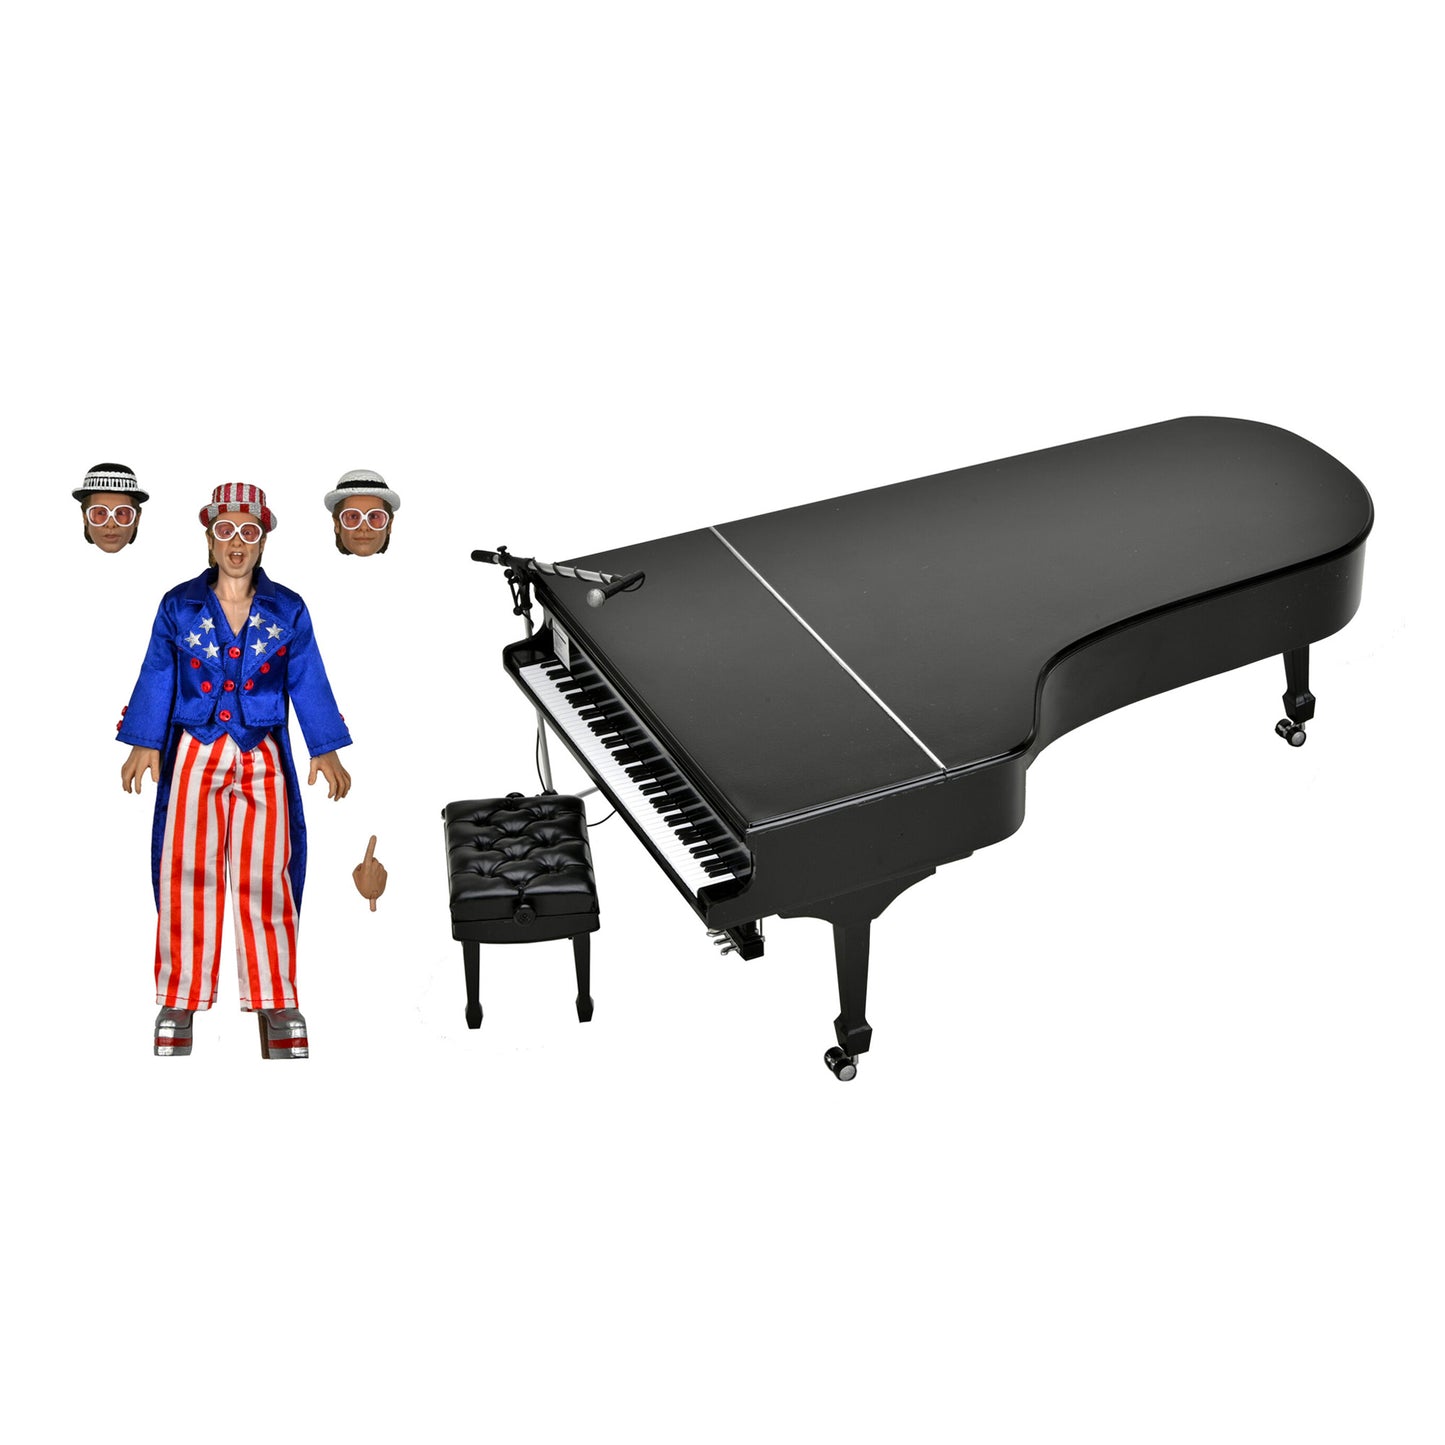 NECA: Elton John with Piano (Live in 1976) 8" Tall Action Figure